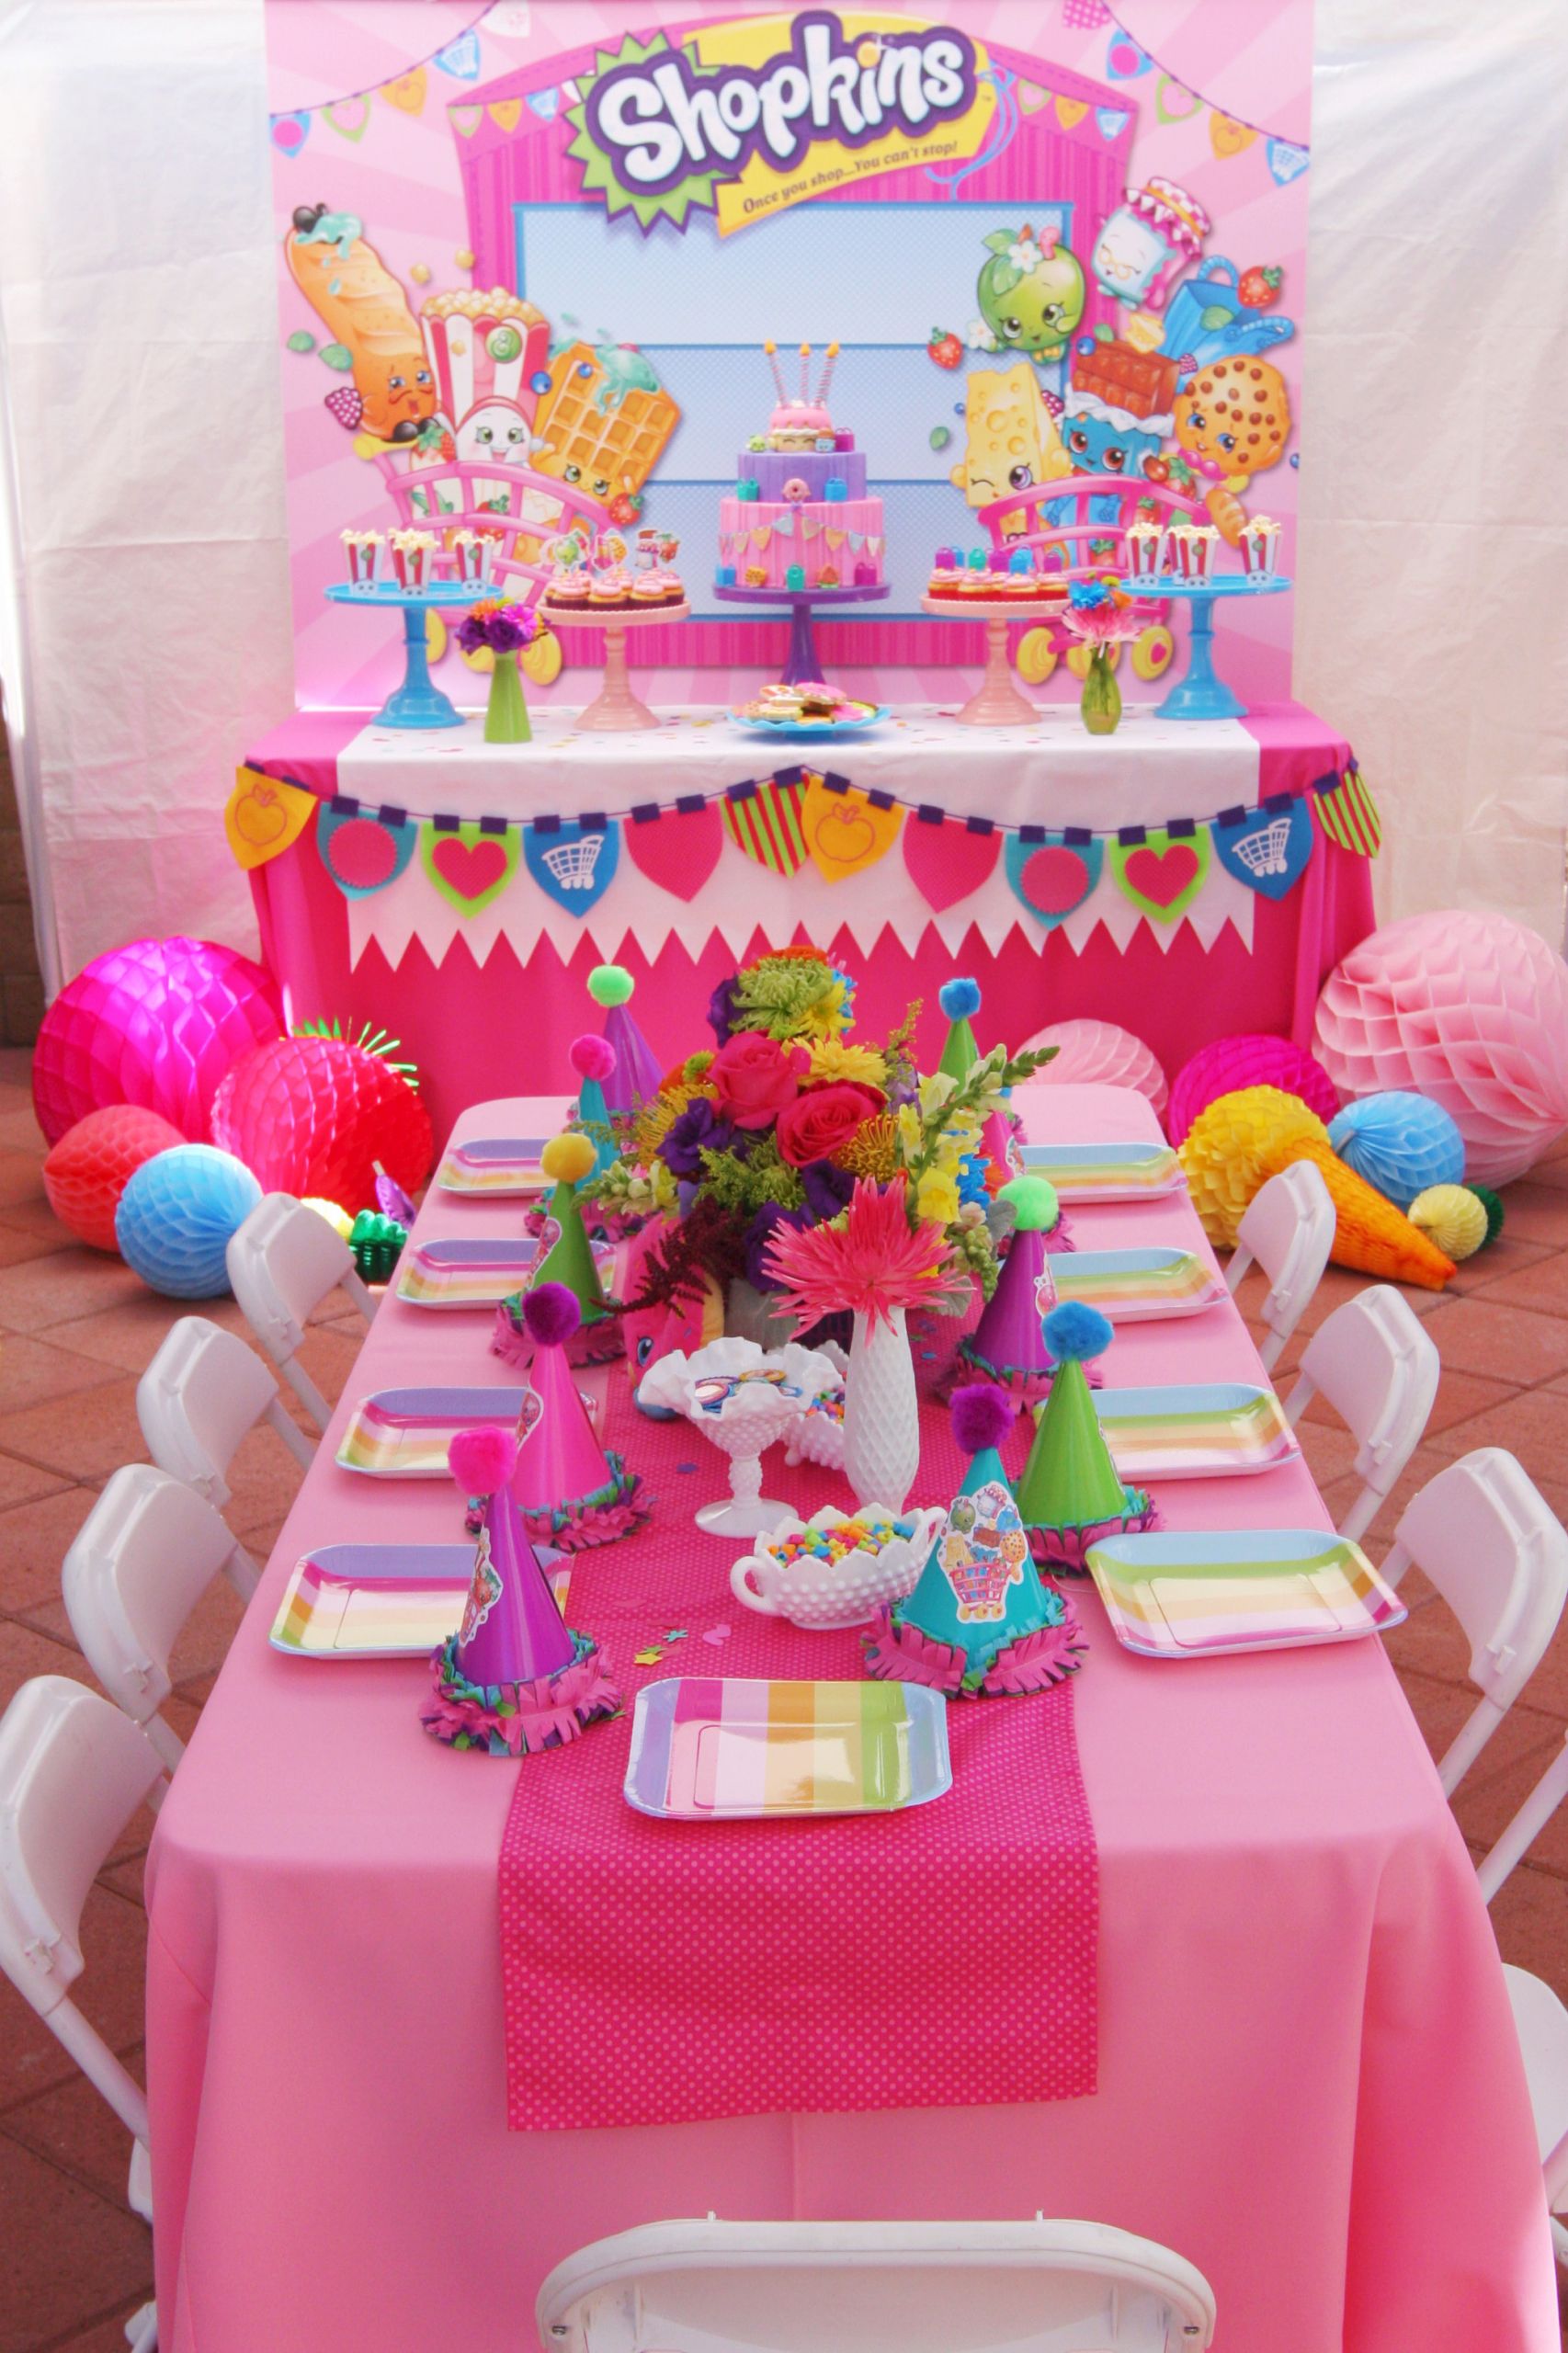 DIY Shopkins Party Decorations
 Shopkins Birthday Party by Minted and Vintage